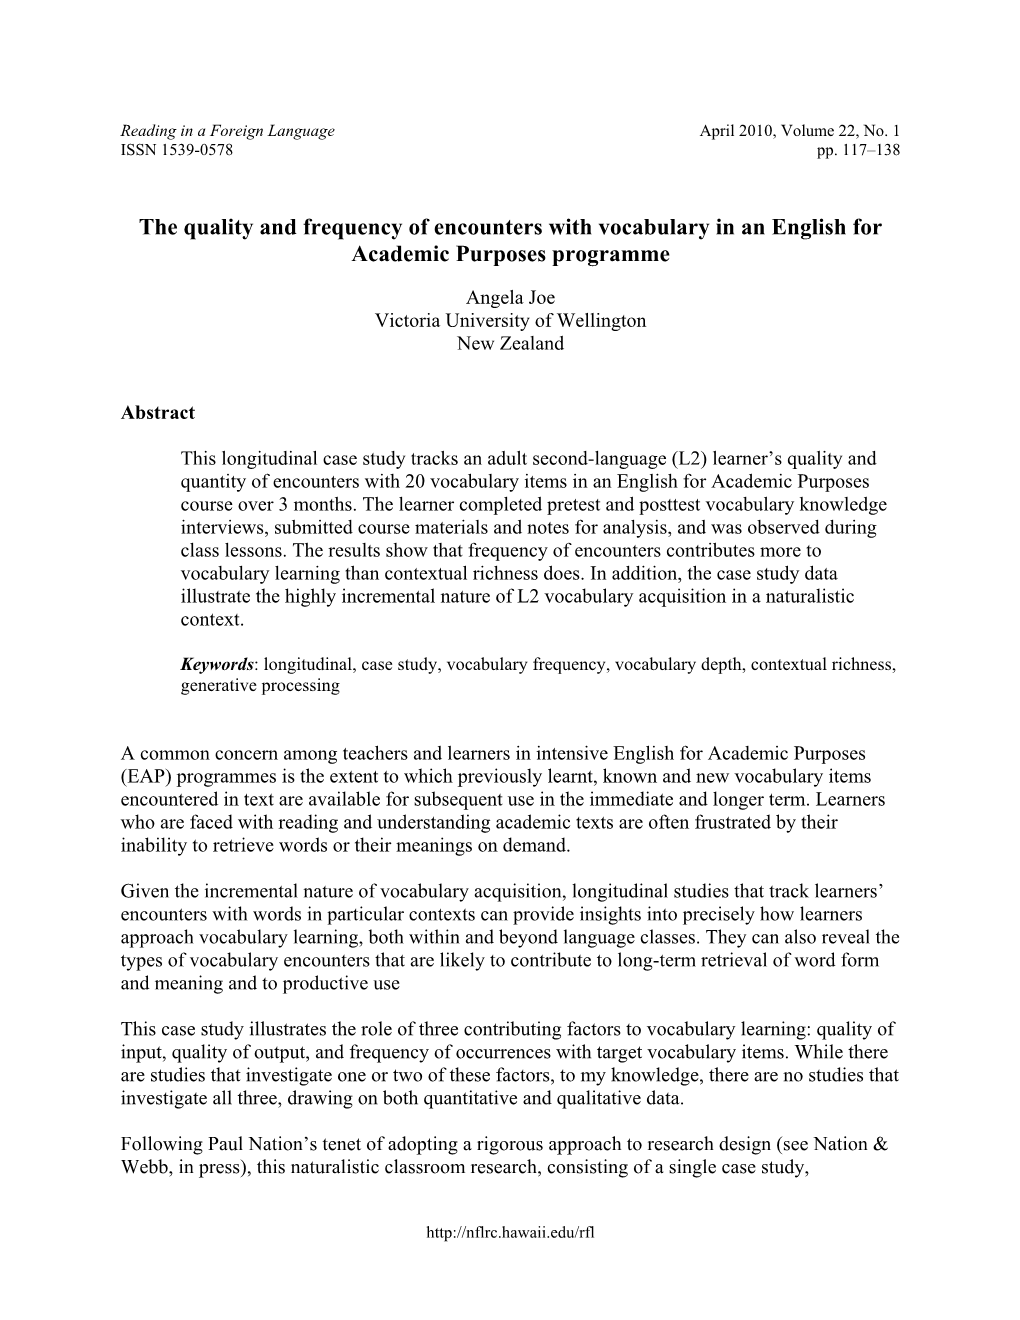 The Quality and Frequency of Encounters with Vocabulary in an English for Academic Purposes Programme